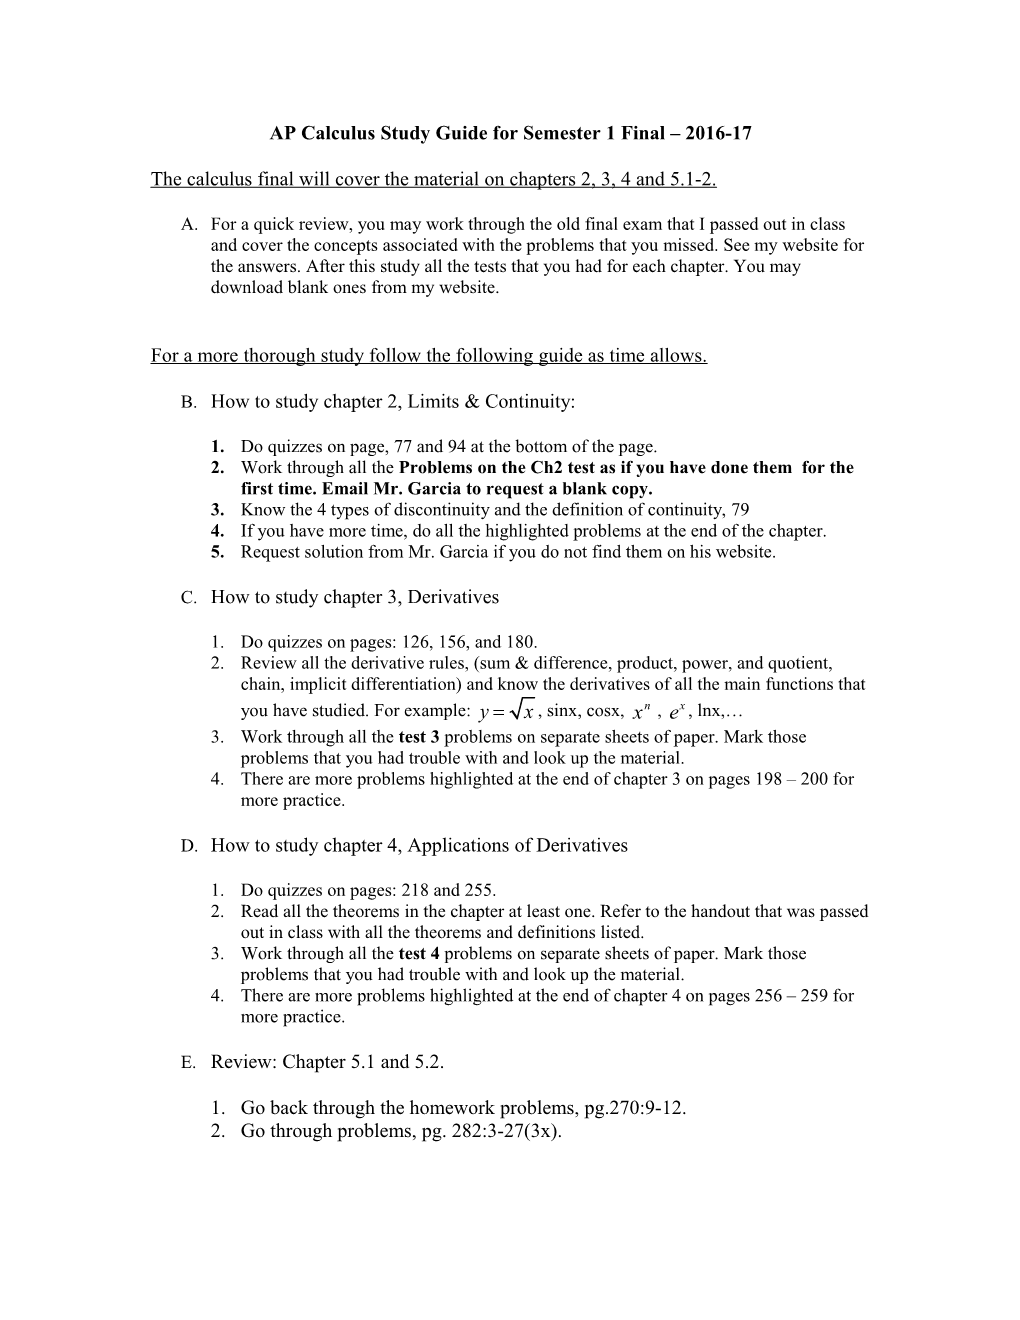 Algebra 2 Study Guide for the Final Exam, Chapters 5, 6, 7, 9